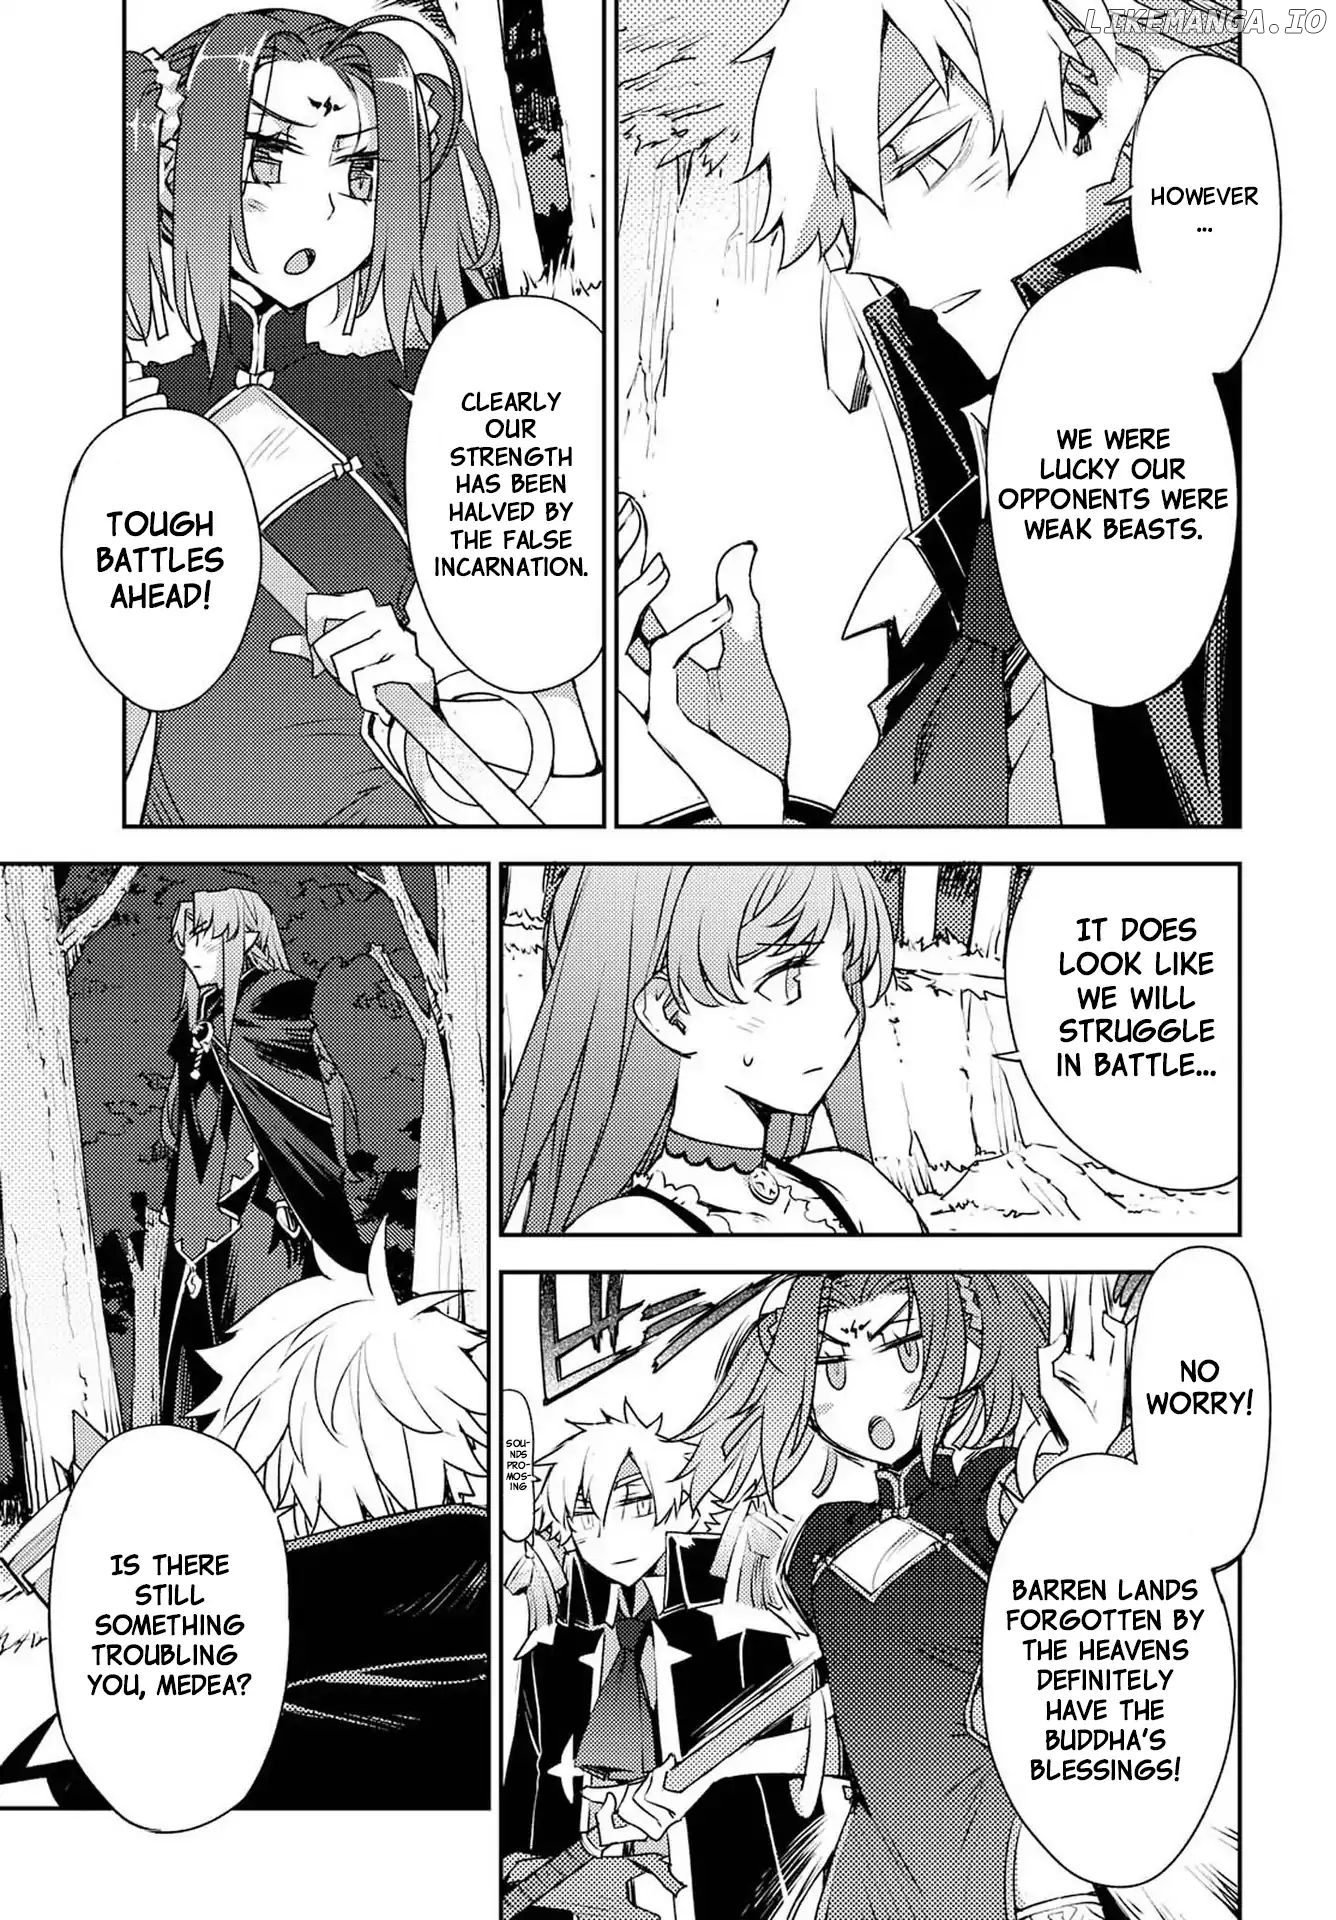 Fate/Grand Order: Epic of Remnant - Subspecies Singularity IV: Taboo Advent Salem: Salem of Heresy chapter 3 - page 5